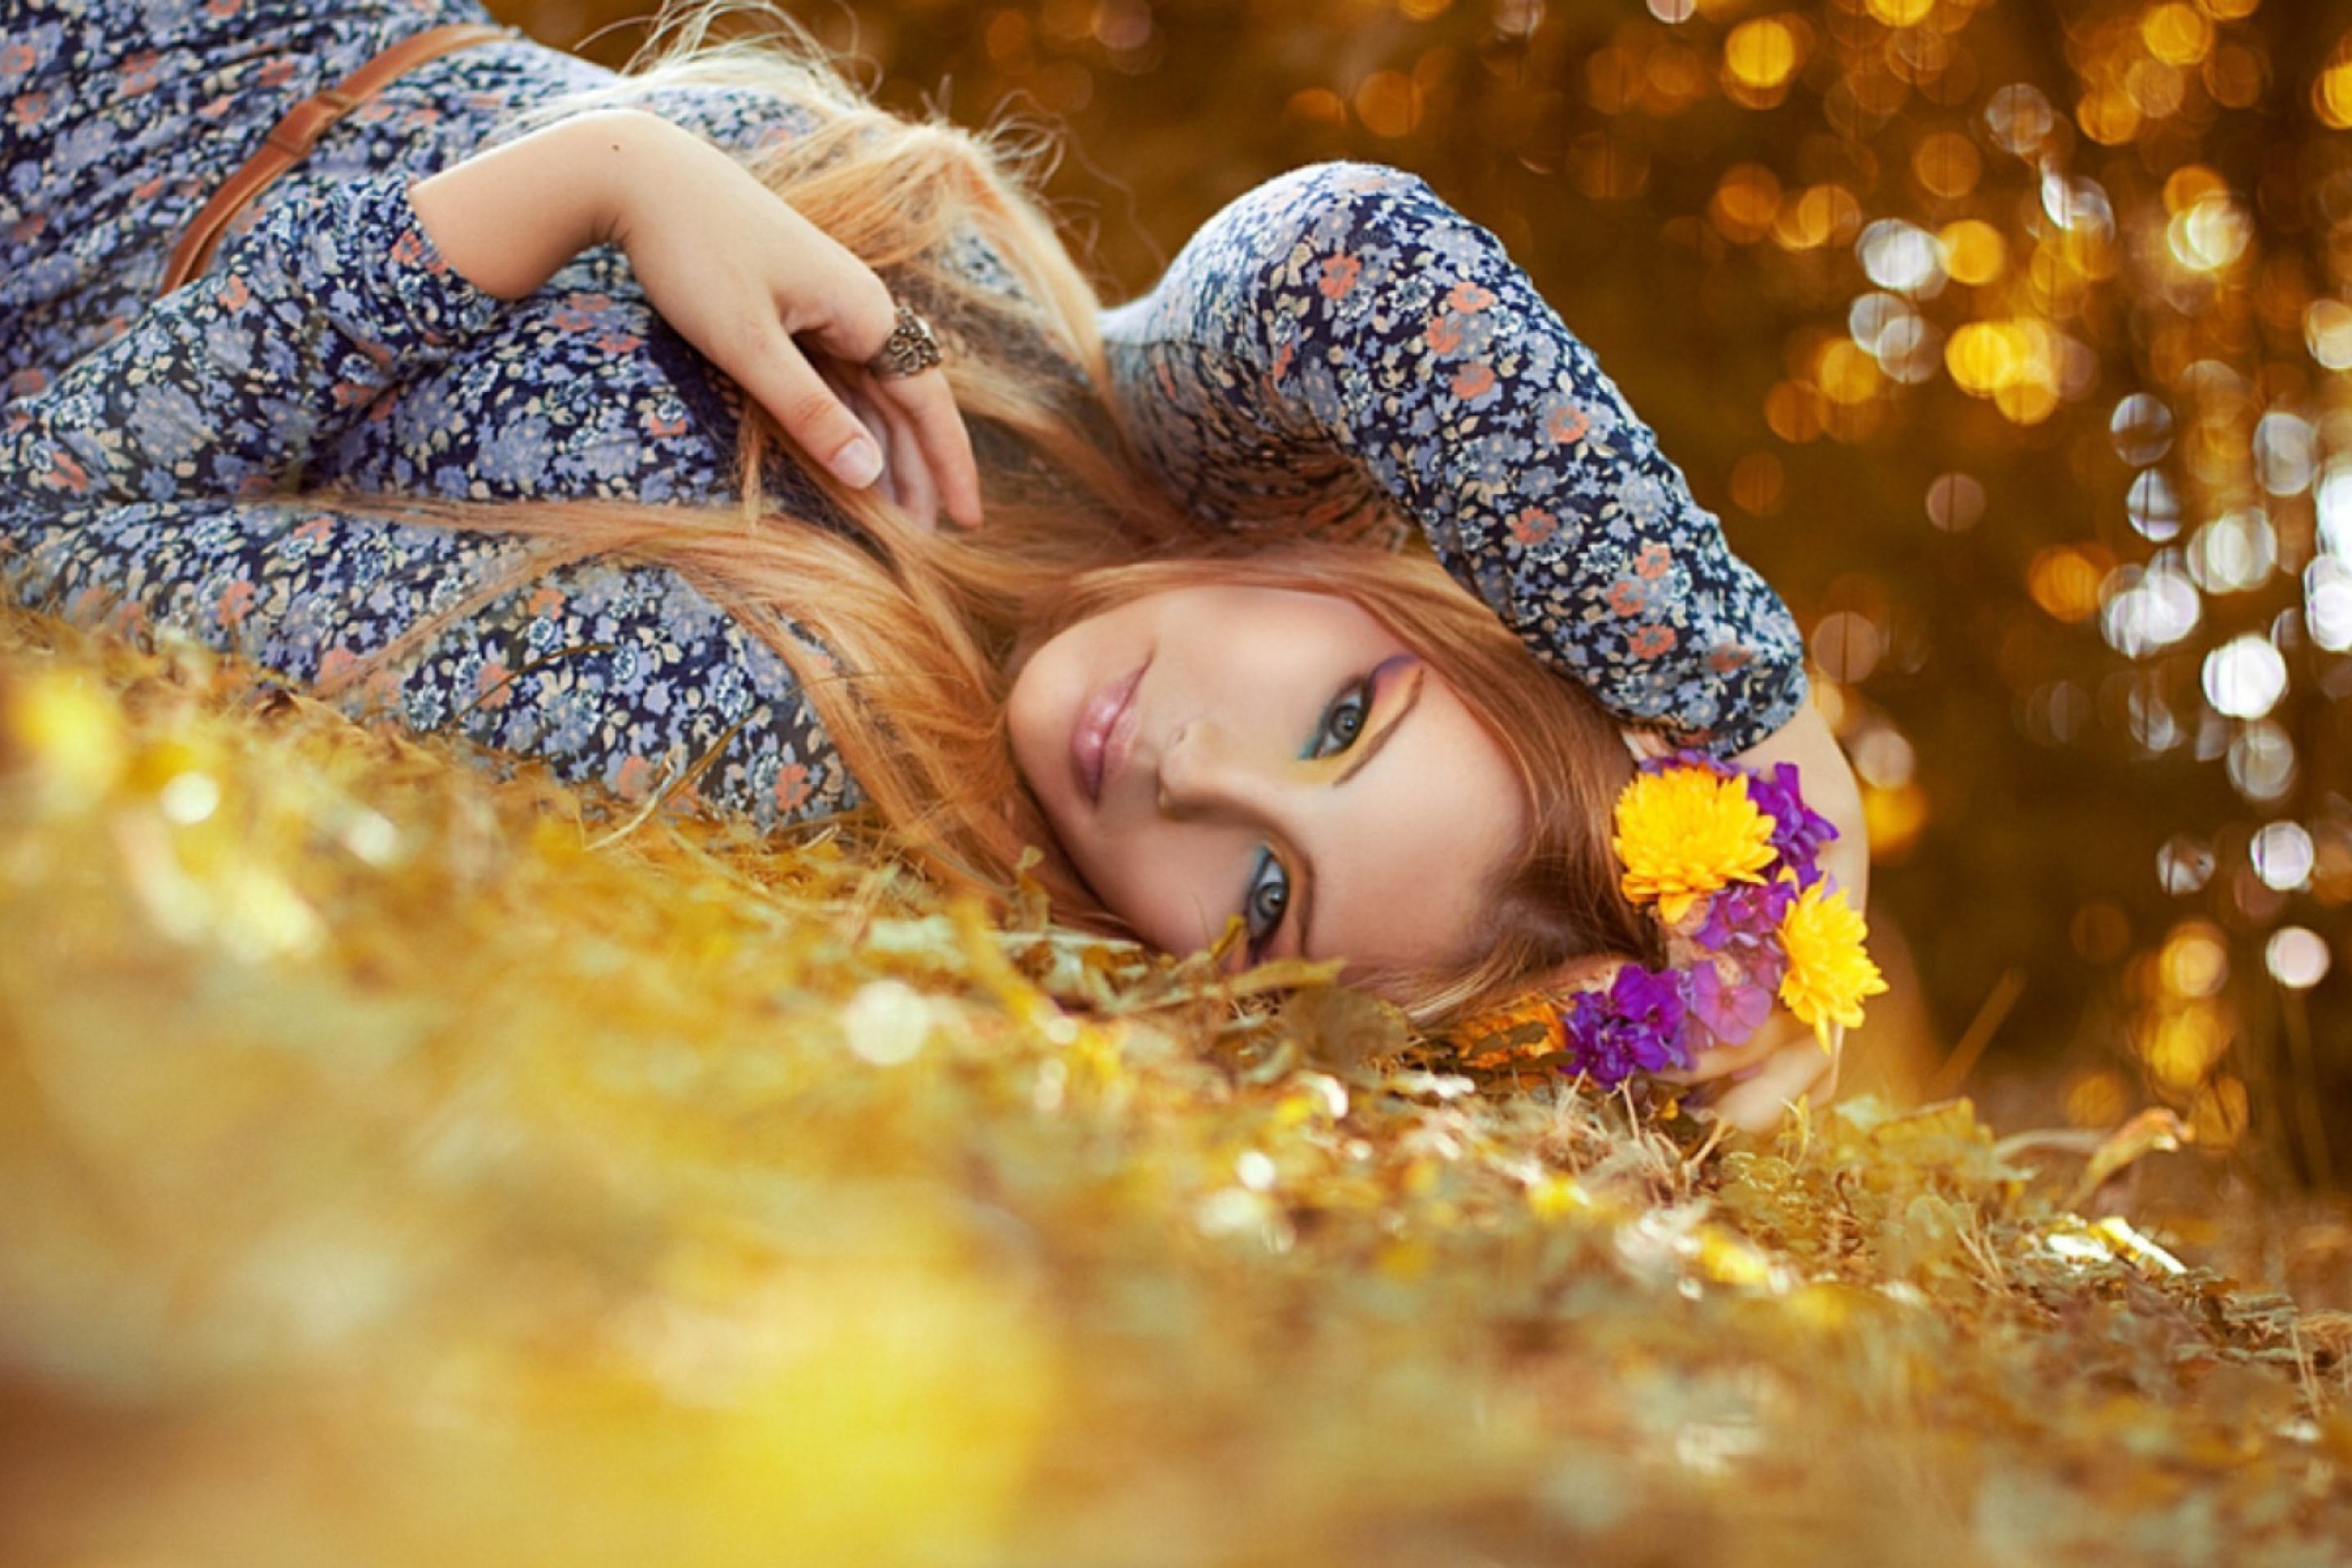 Romantic Girl With Flowers wallpaper 2880x1920